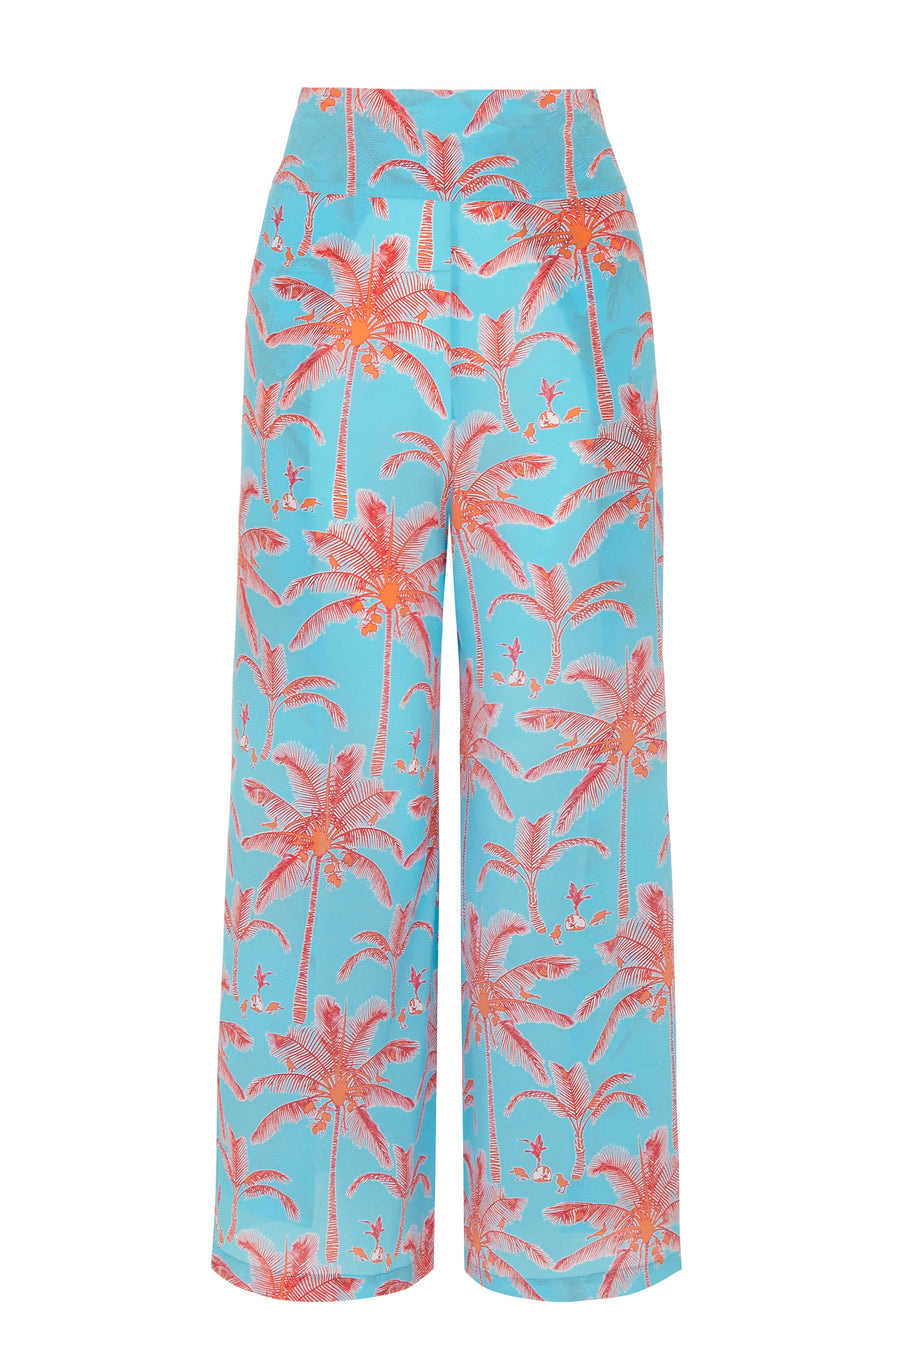 Designer silk wedding outfit, palazzo pants in tropical turquoise & orange plantation palm print